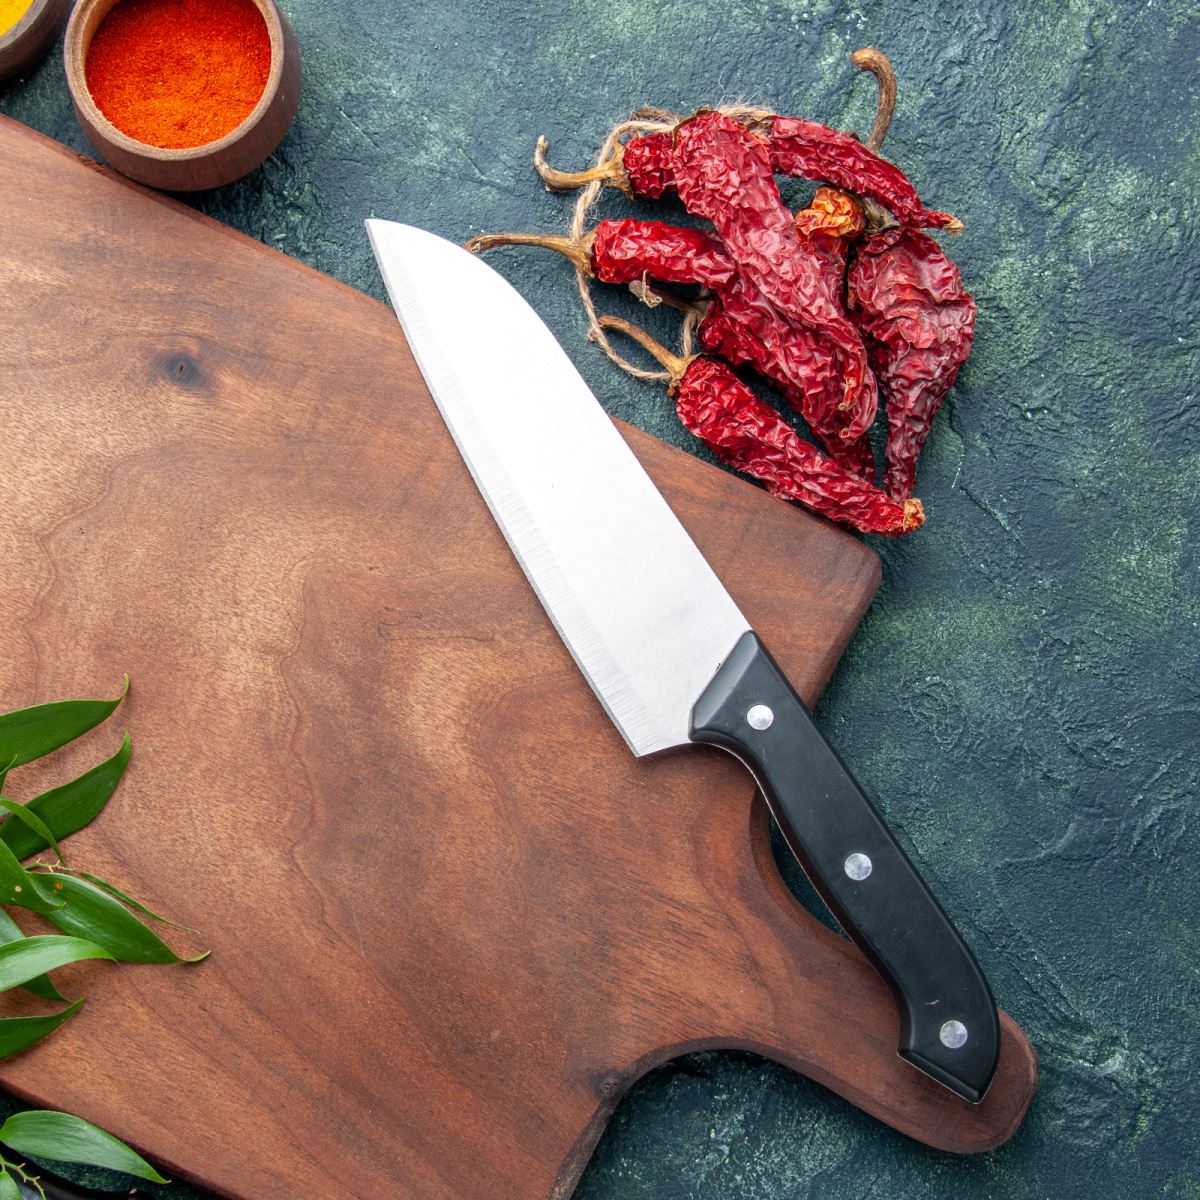 Choosing the Right Knife and Maintenance Methods in the Kitchen